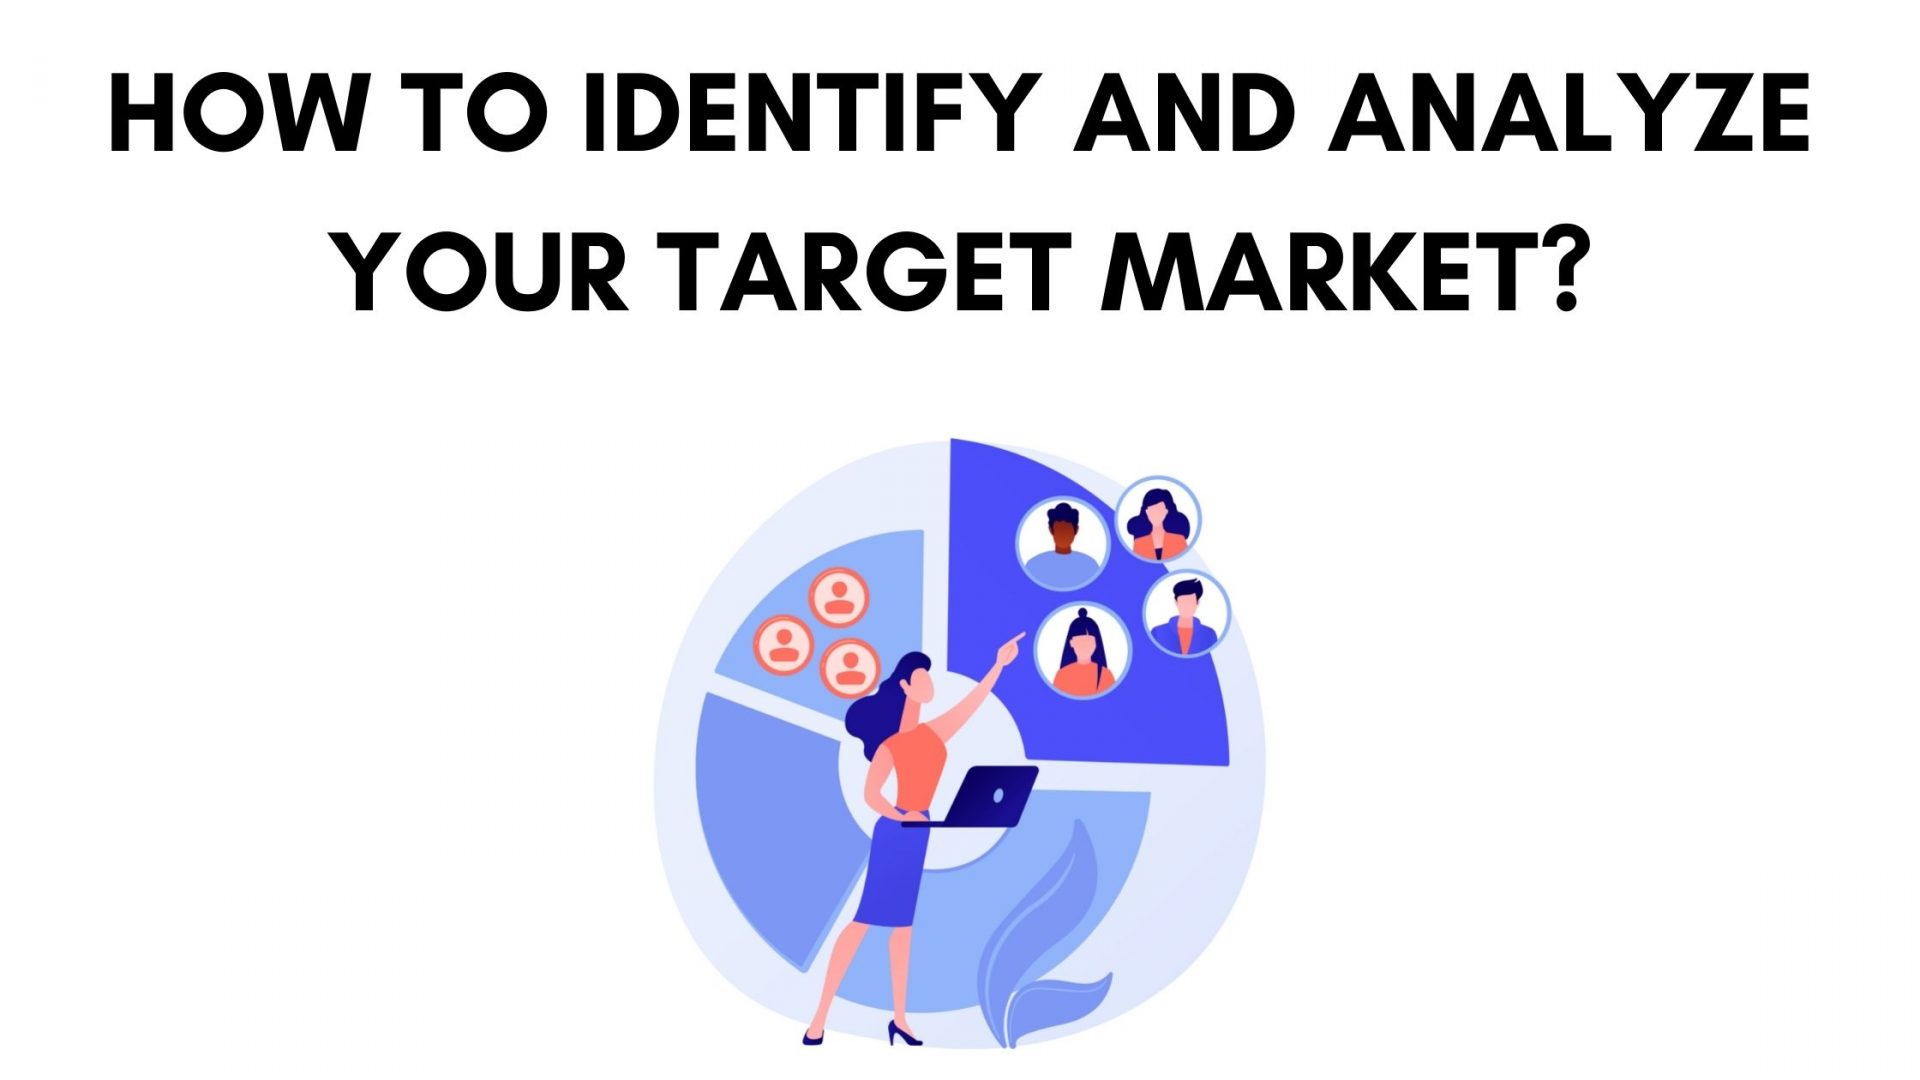 Analyze and identify your target market